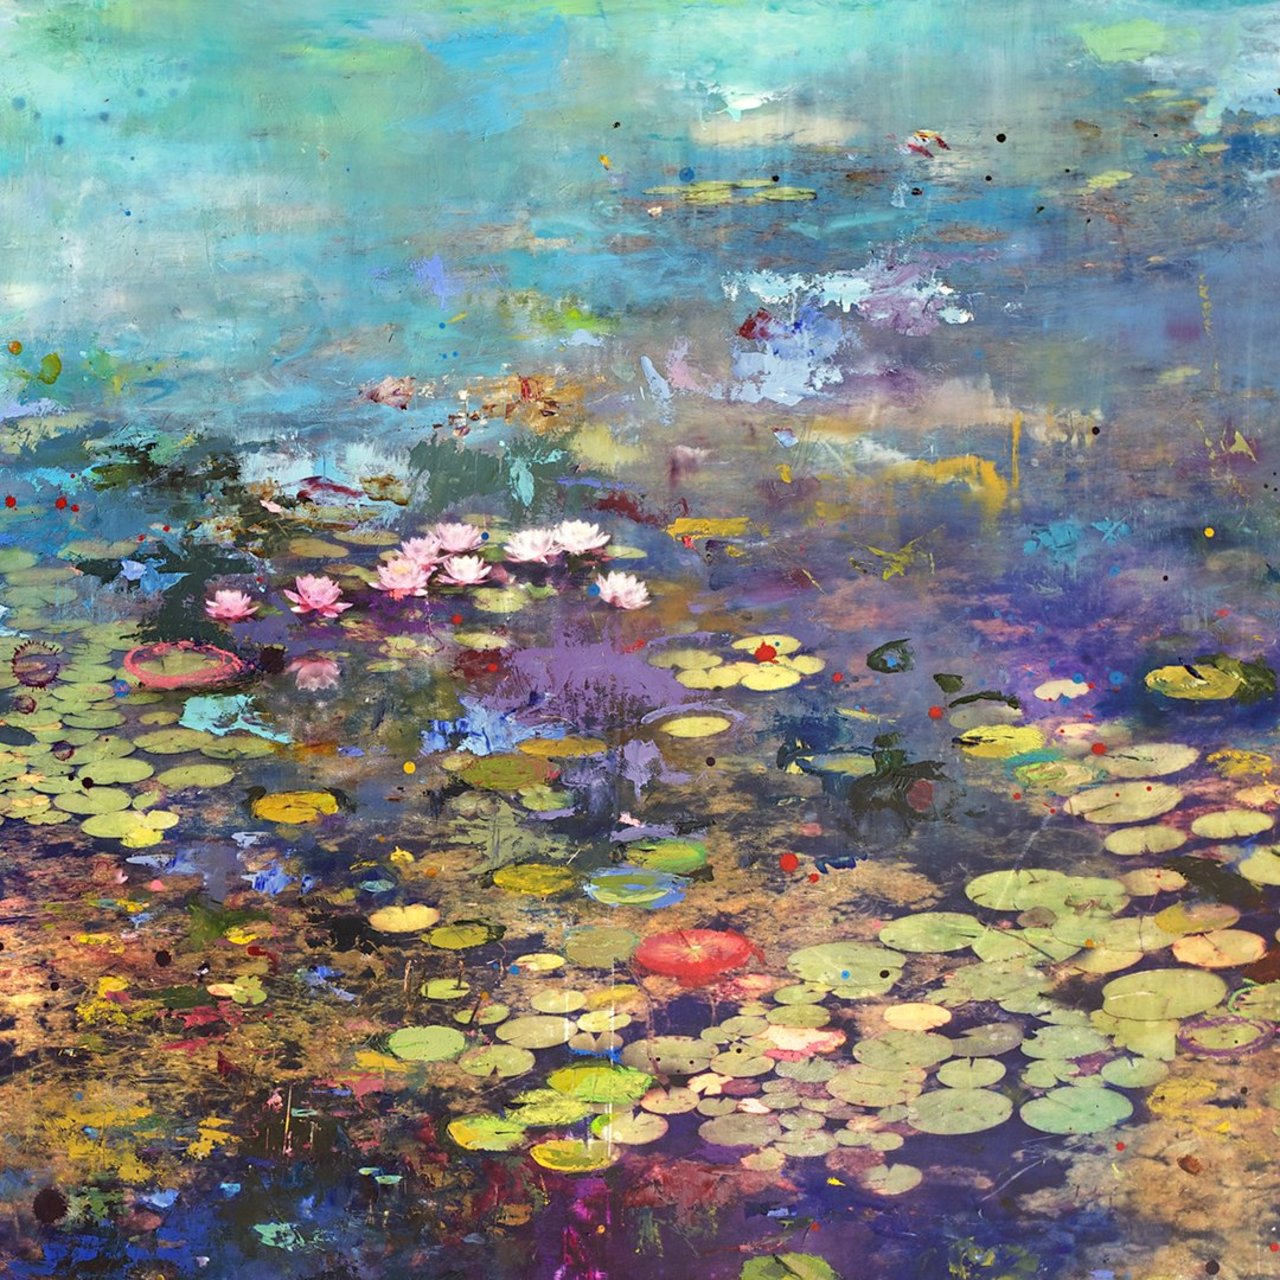 Artist merges #photography and #art to create #impressionist landscapes http://j.mp/21VfffY https://t.co/PhssxyVpCJ